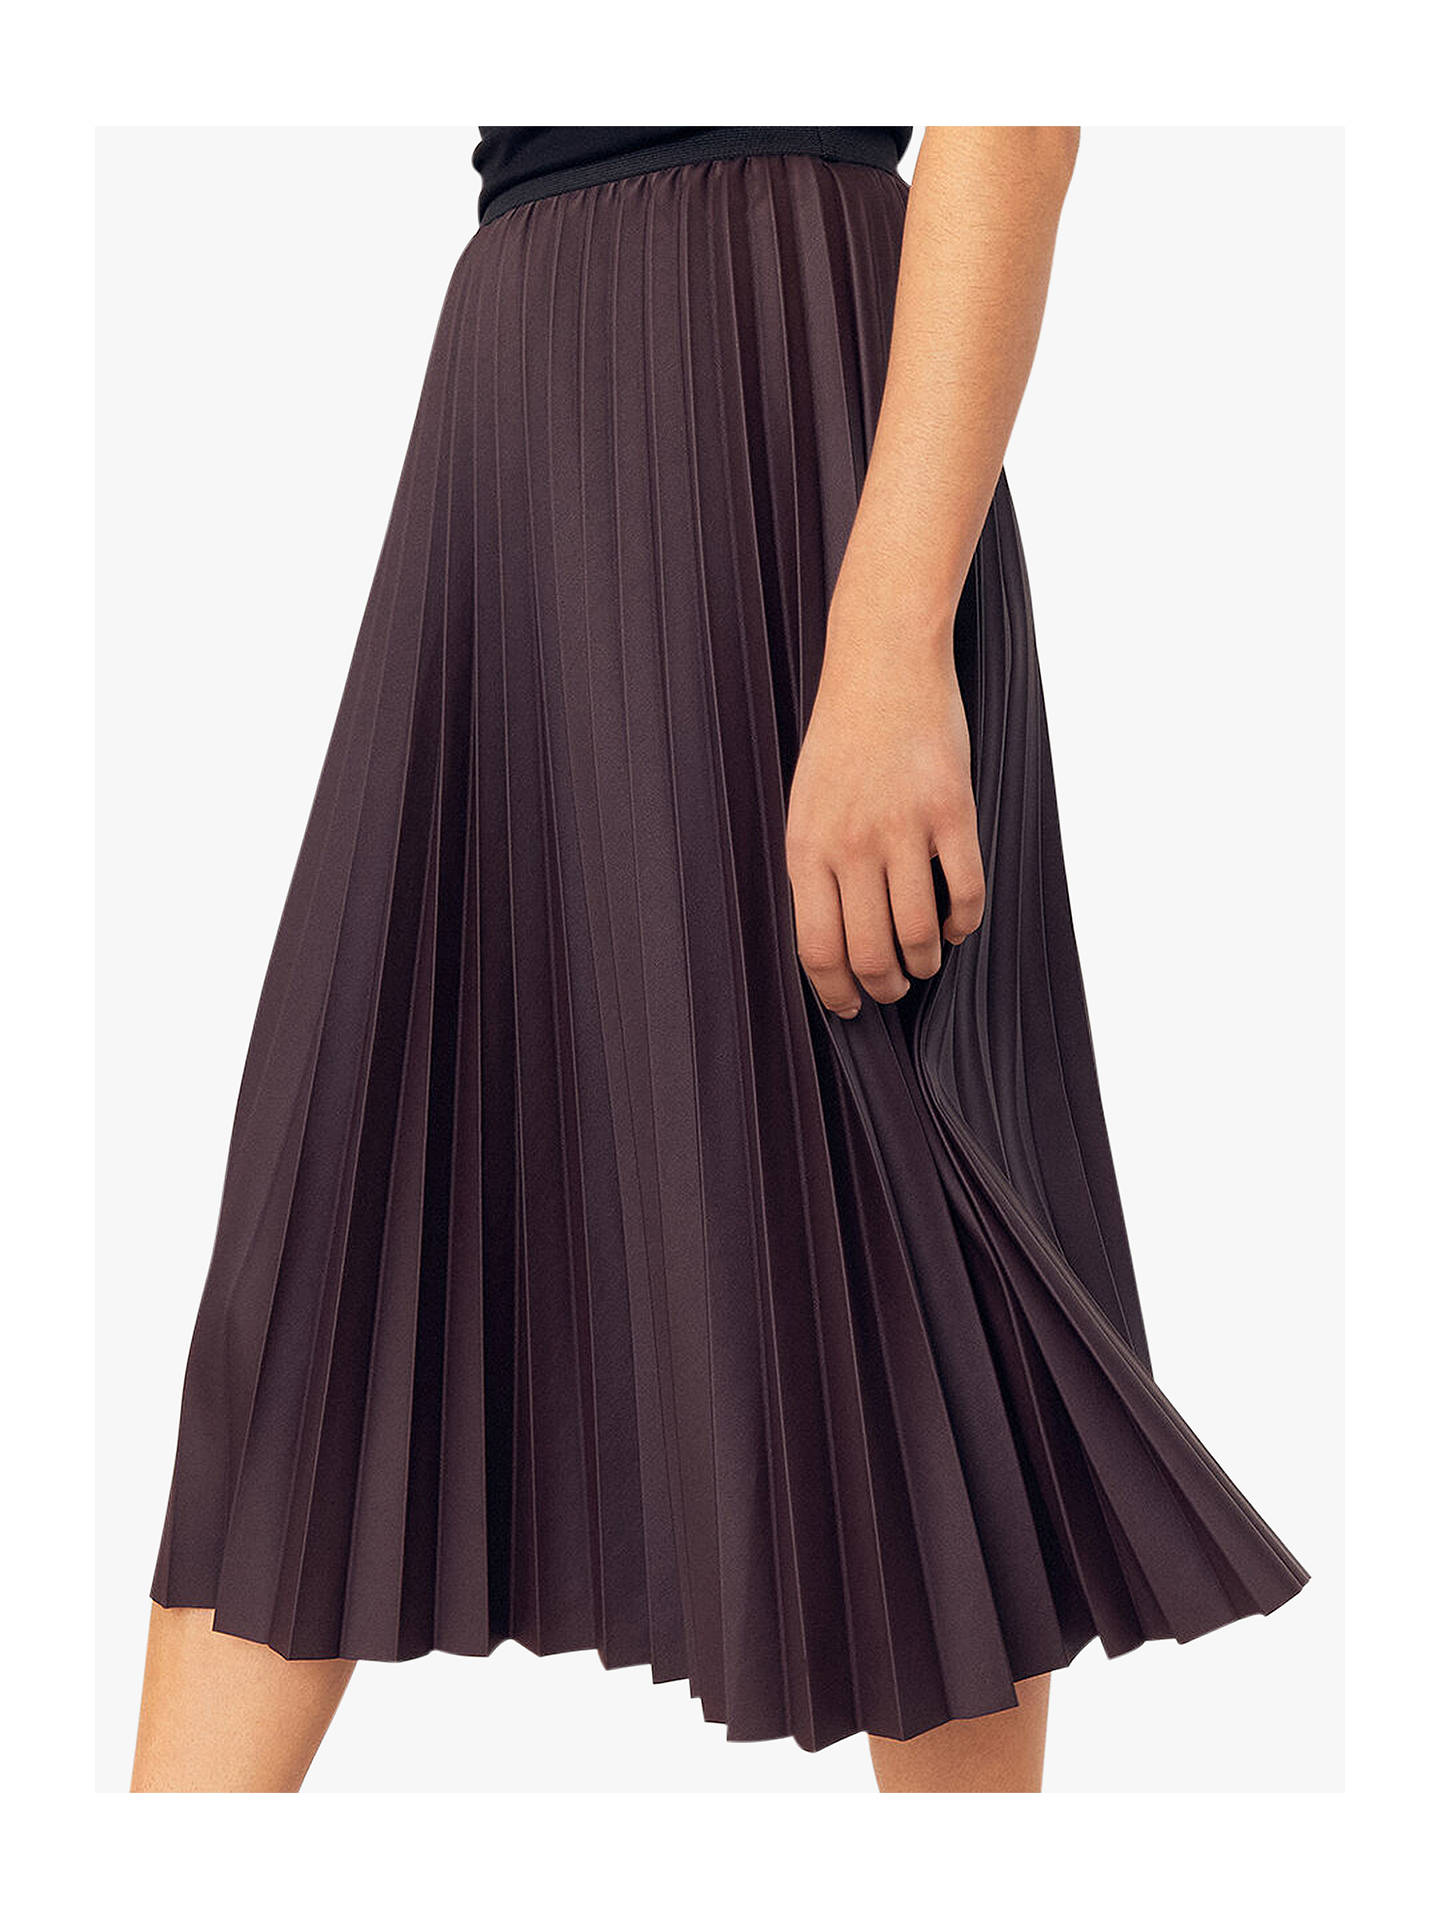 Oasis Faux-Leather Pleated Midi Skirt, Mid Brown at John Lewis & Partners